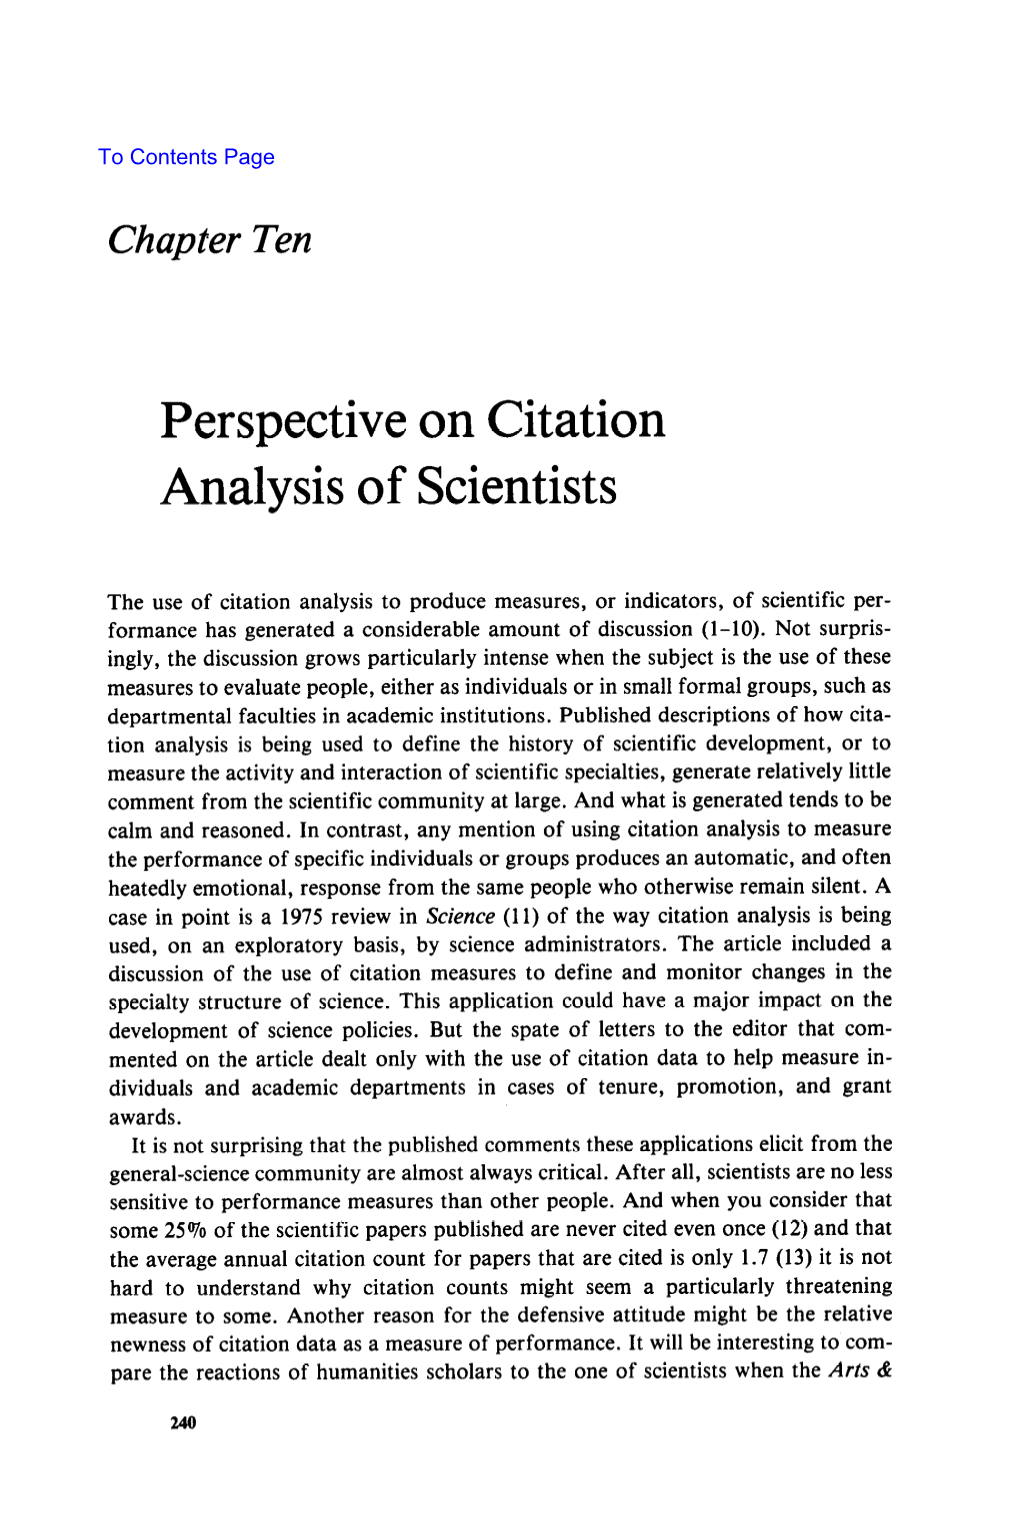 Perspective on Citation Analysis of Scientists